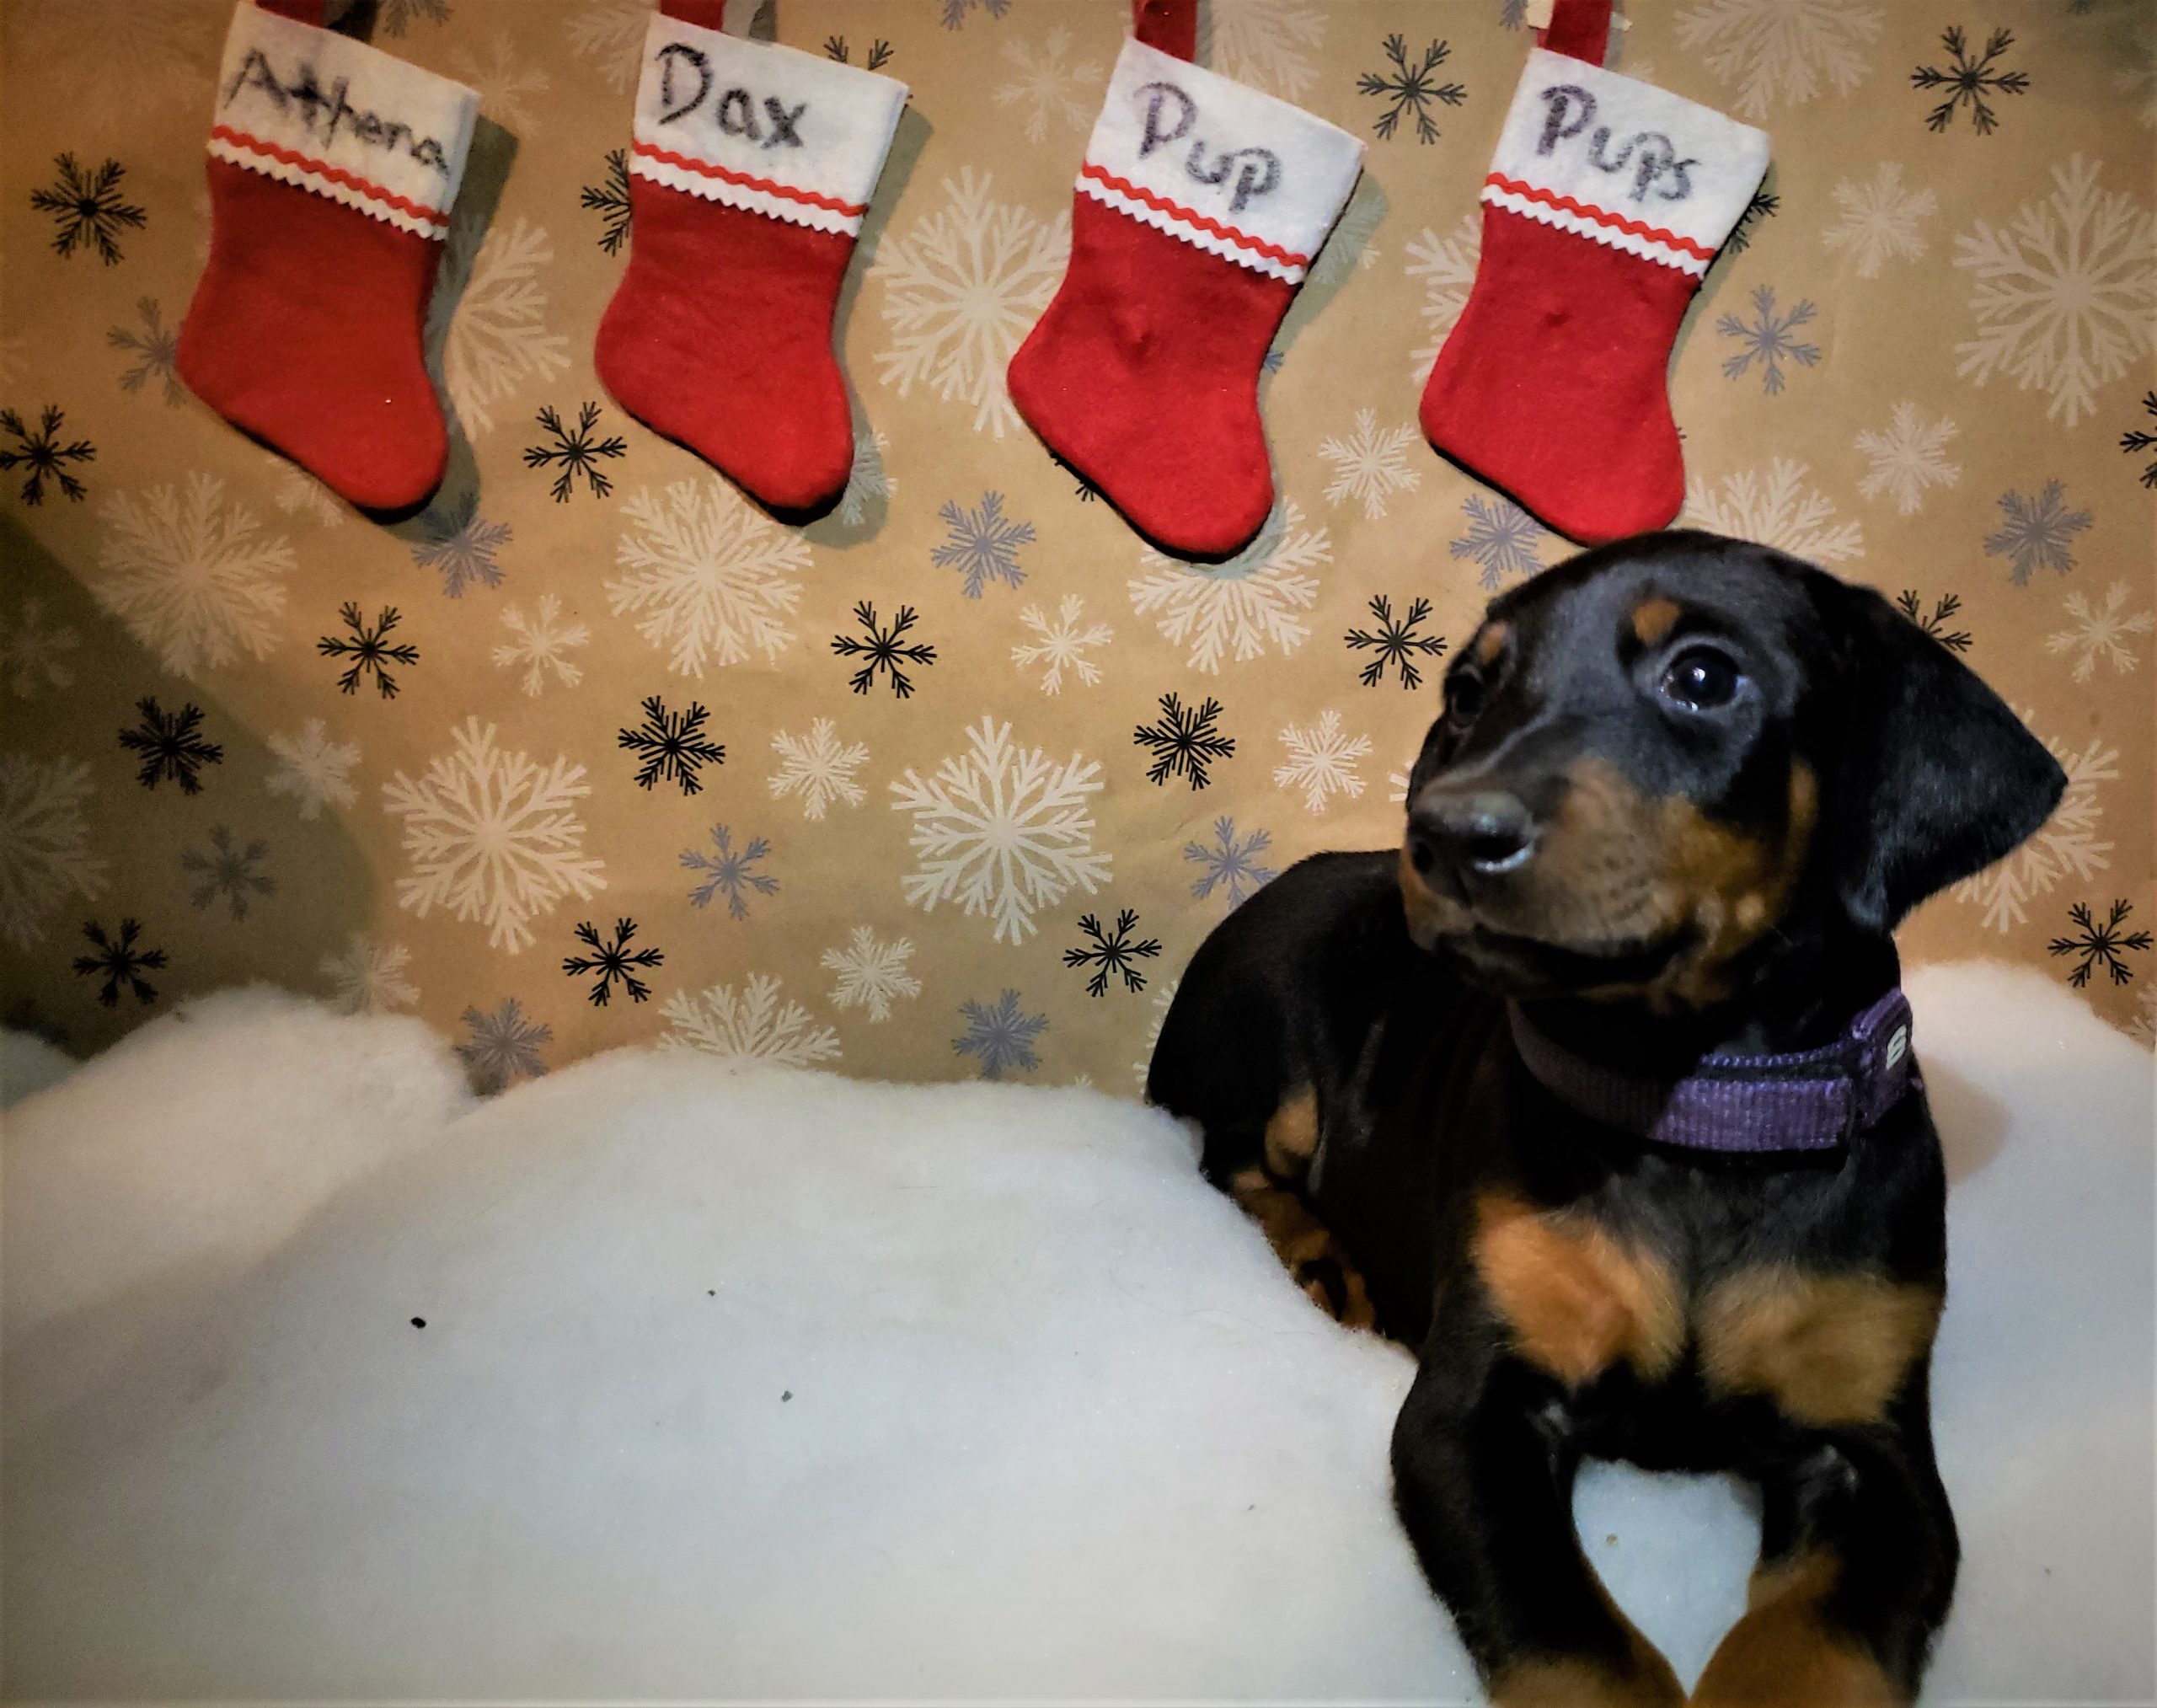 a puppy on a soft blanket with Christmas-themed wallpaper and decors in the background